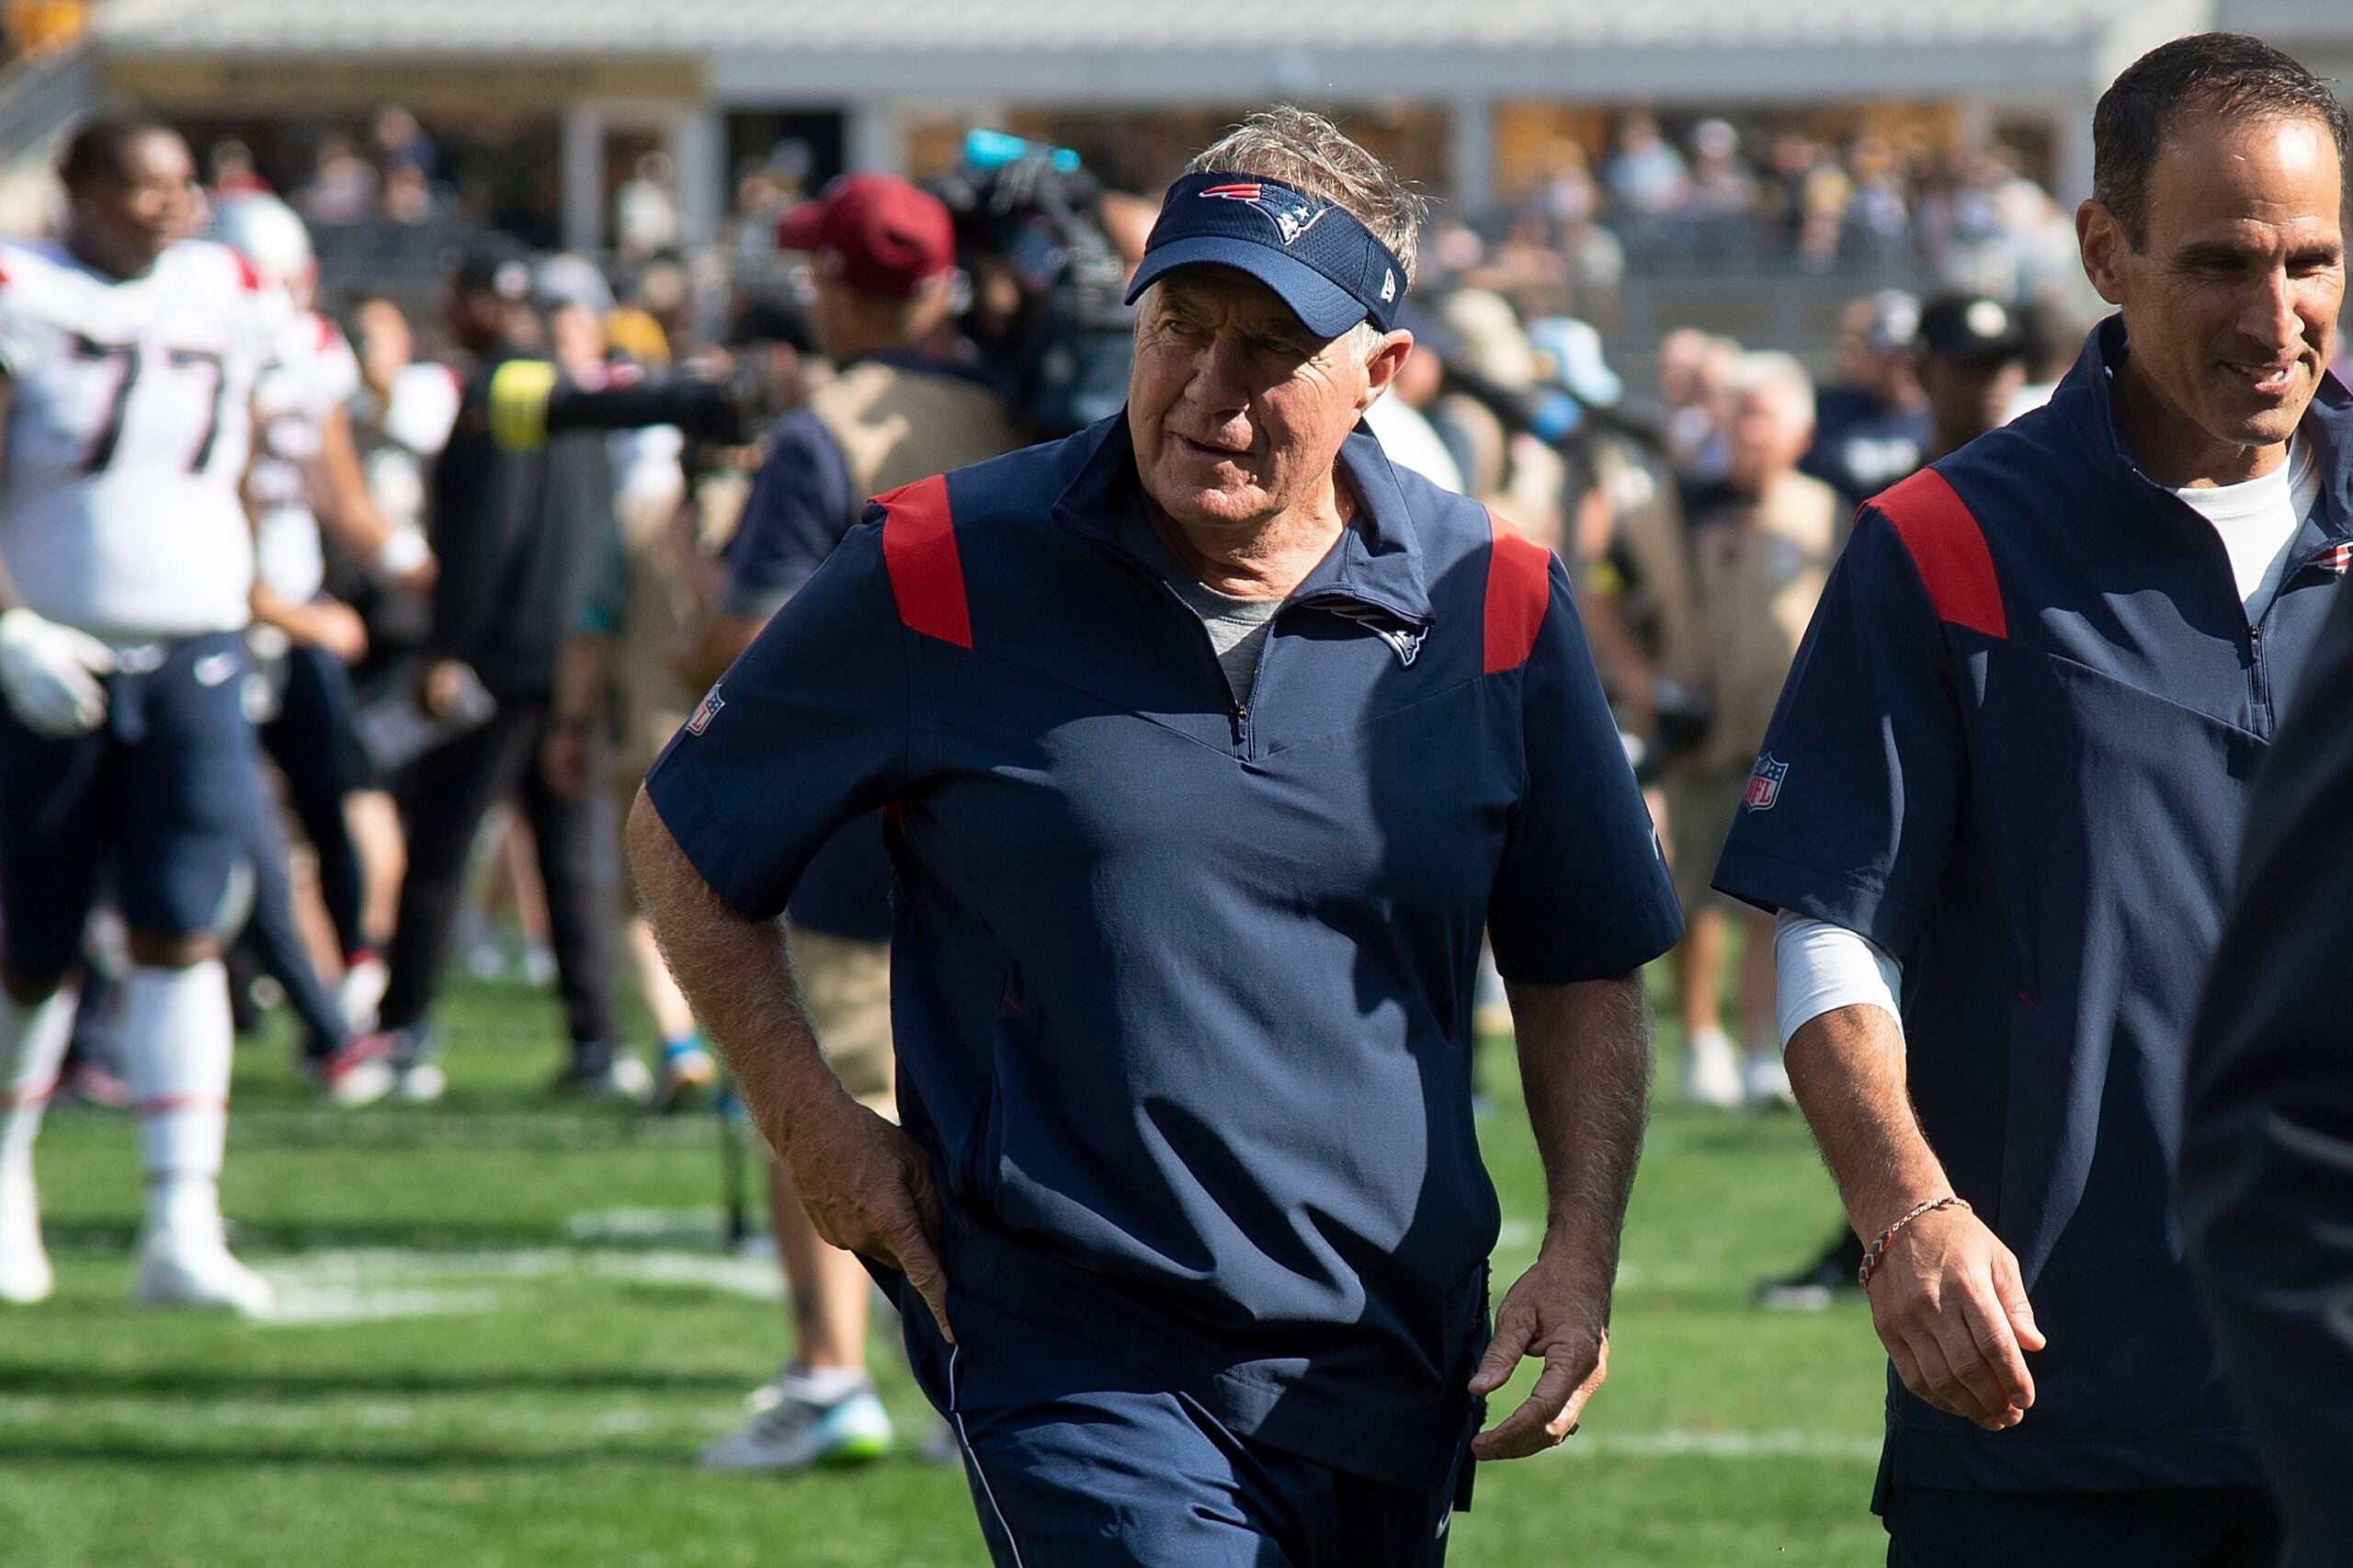 New England Patriots head coach Bill Belichick walks off the field following a 17-14 win over the Pittsburgh Steelers Sunday, Sept. 18, 2022.